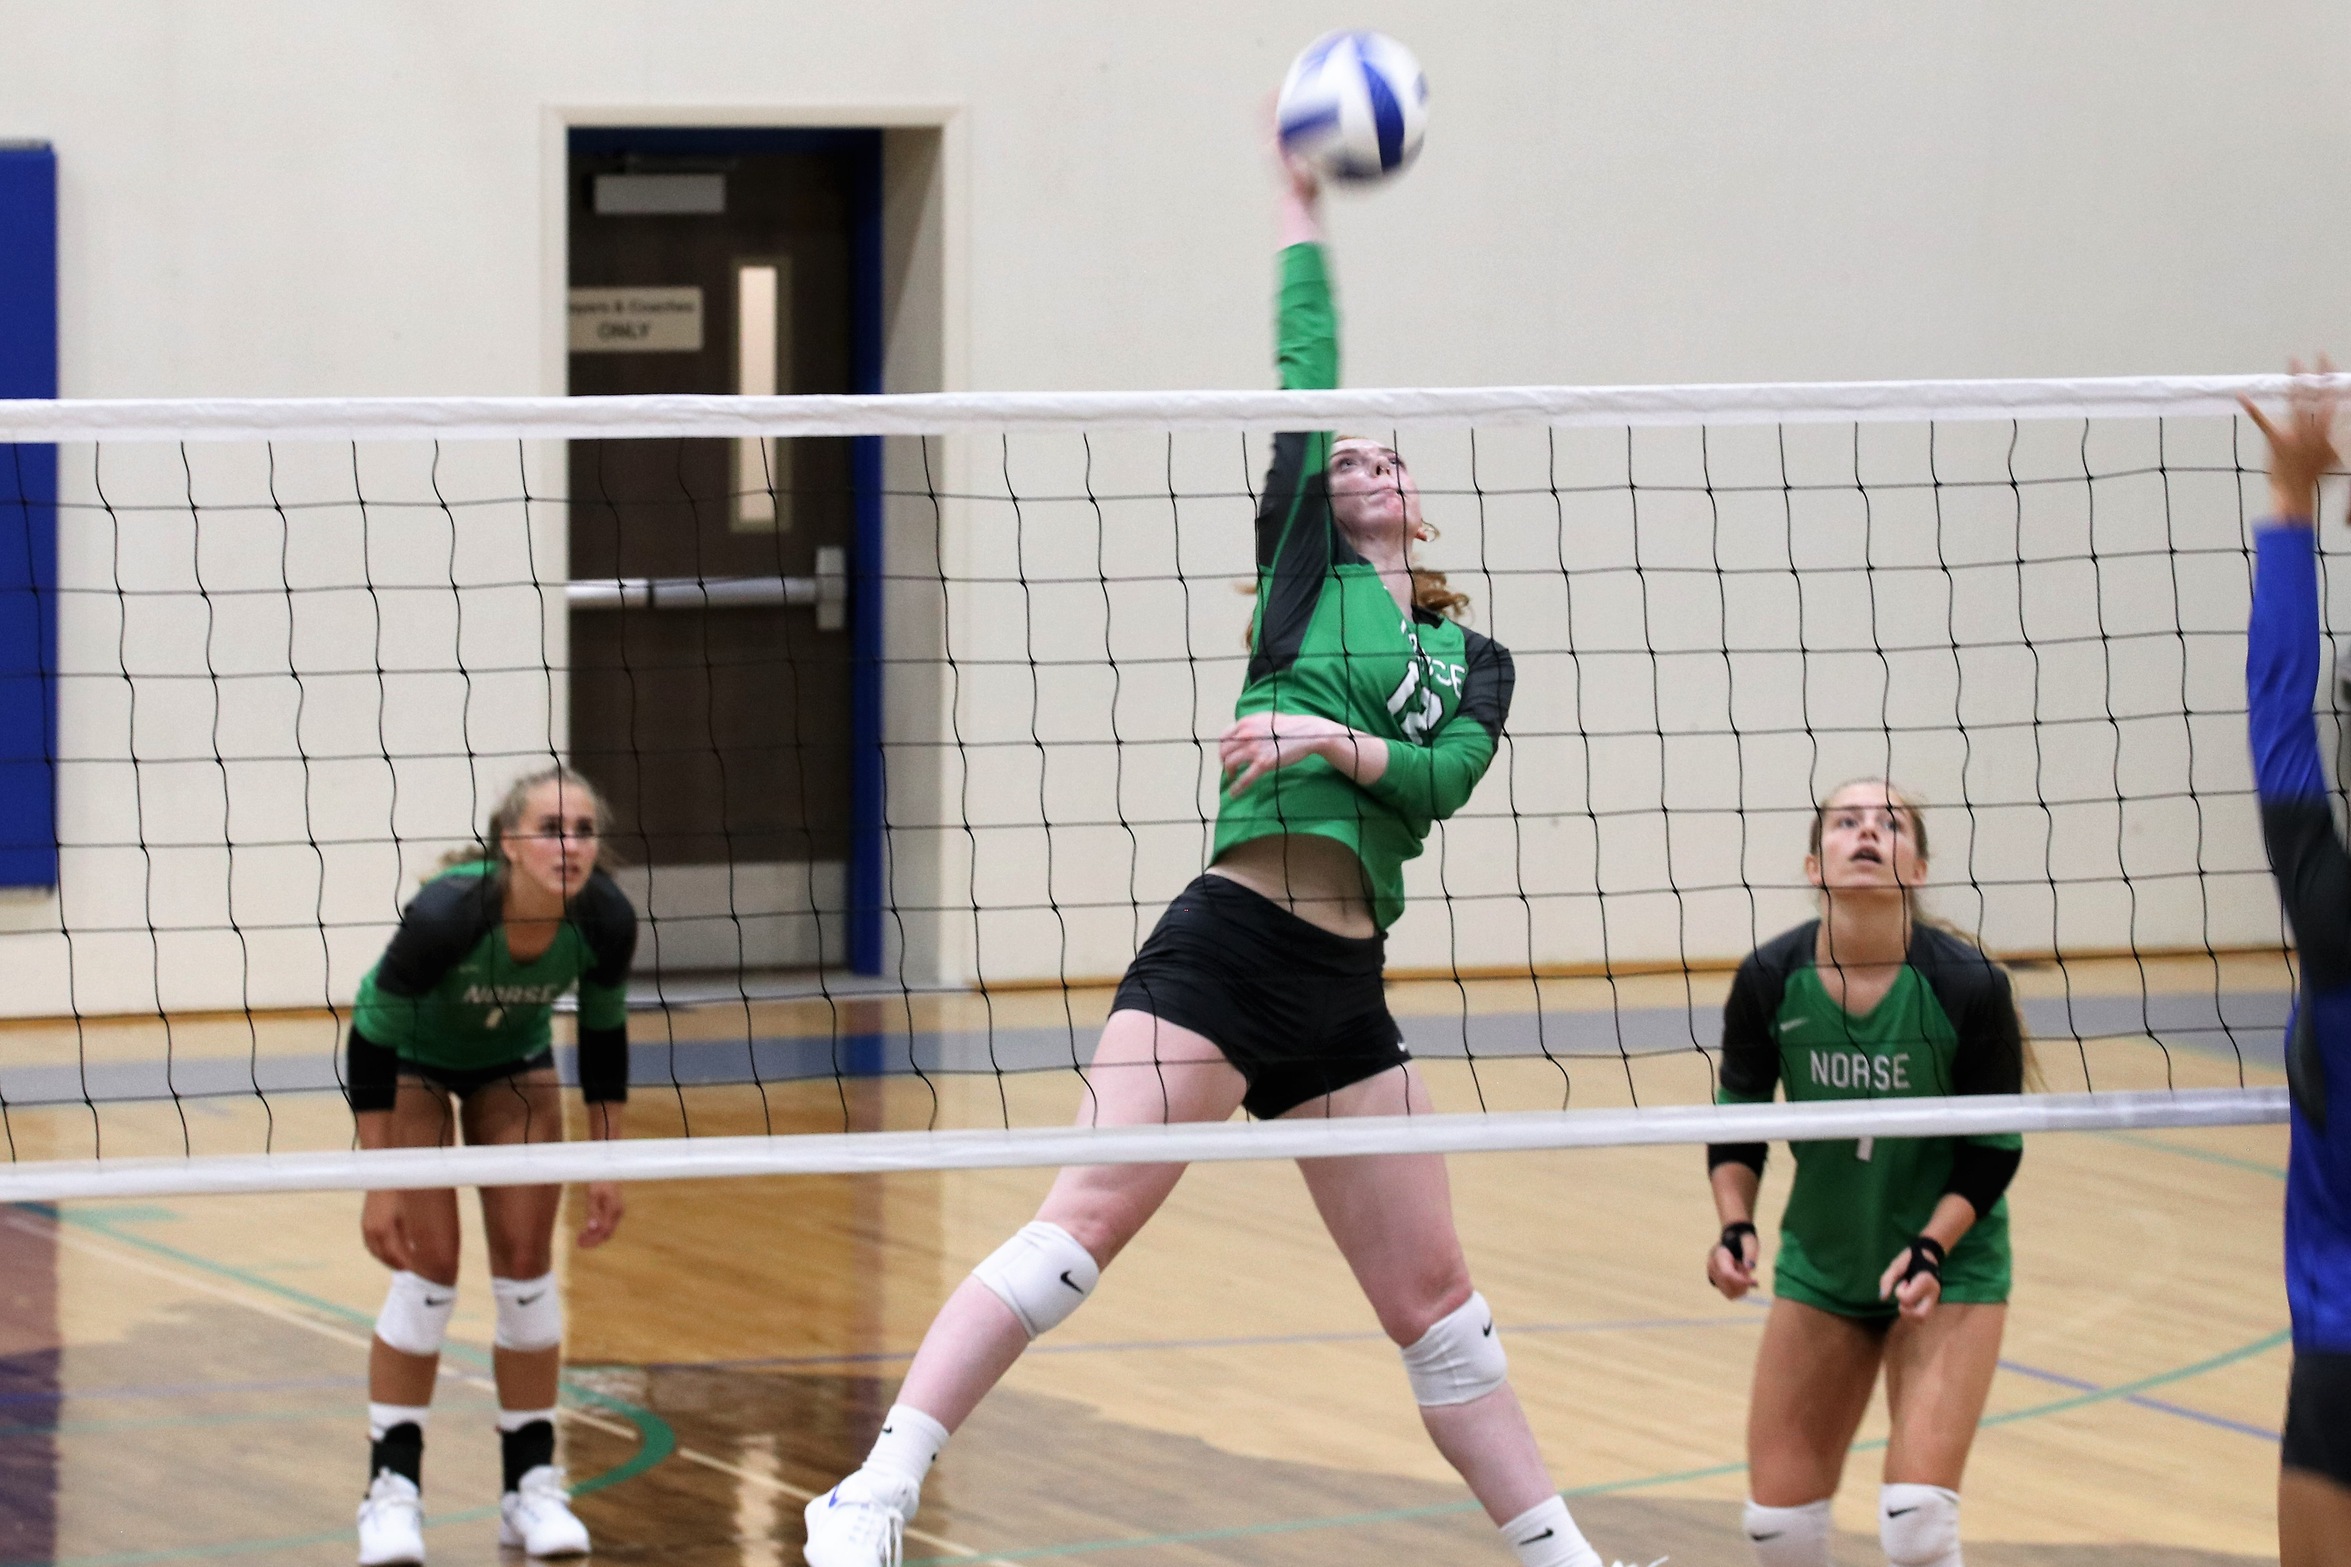 Kylee Tadisch extends in the air for a kill, her teammates looking on